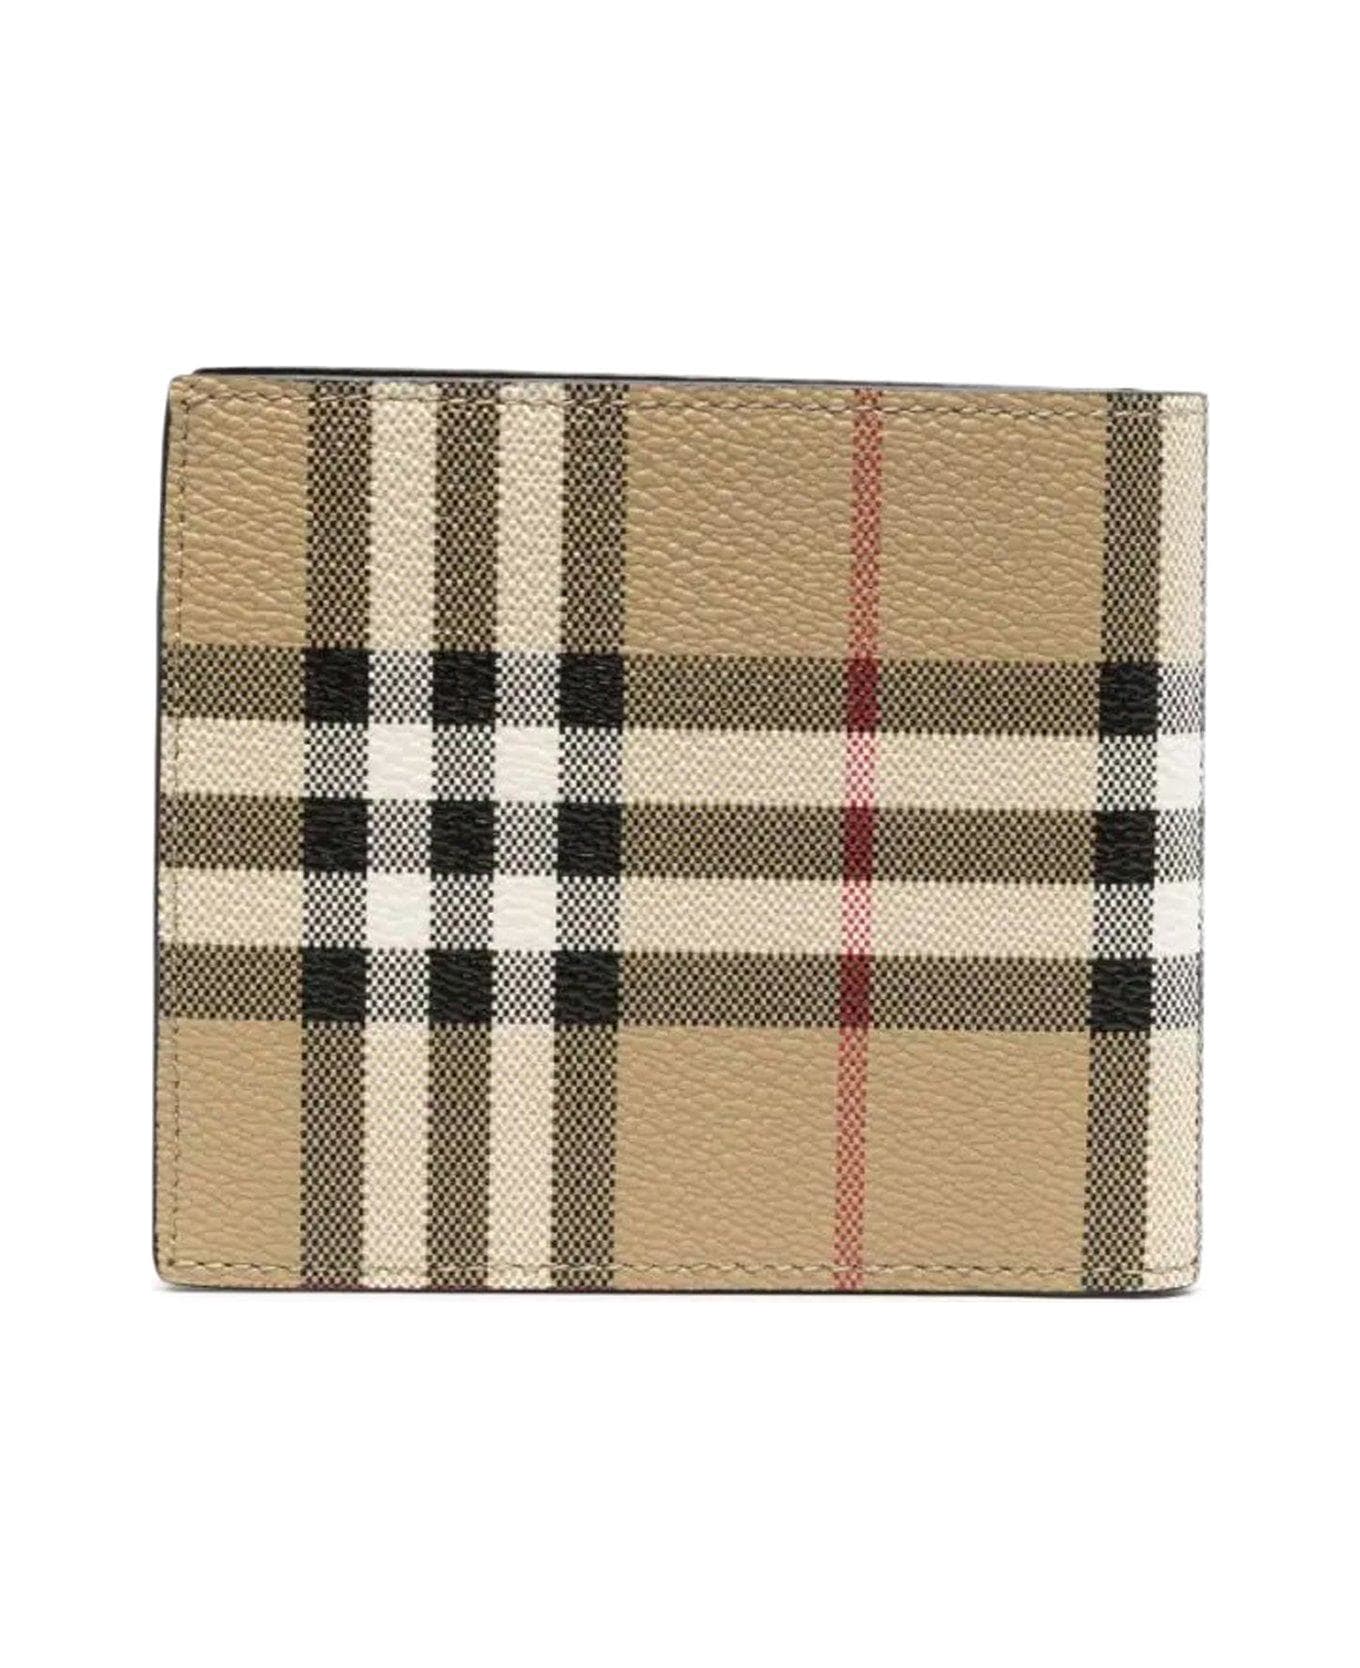 Burberry All-over Check Printed Bi-fold Wallet - Archive Beige